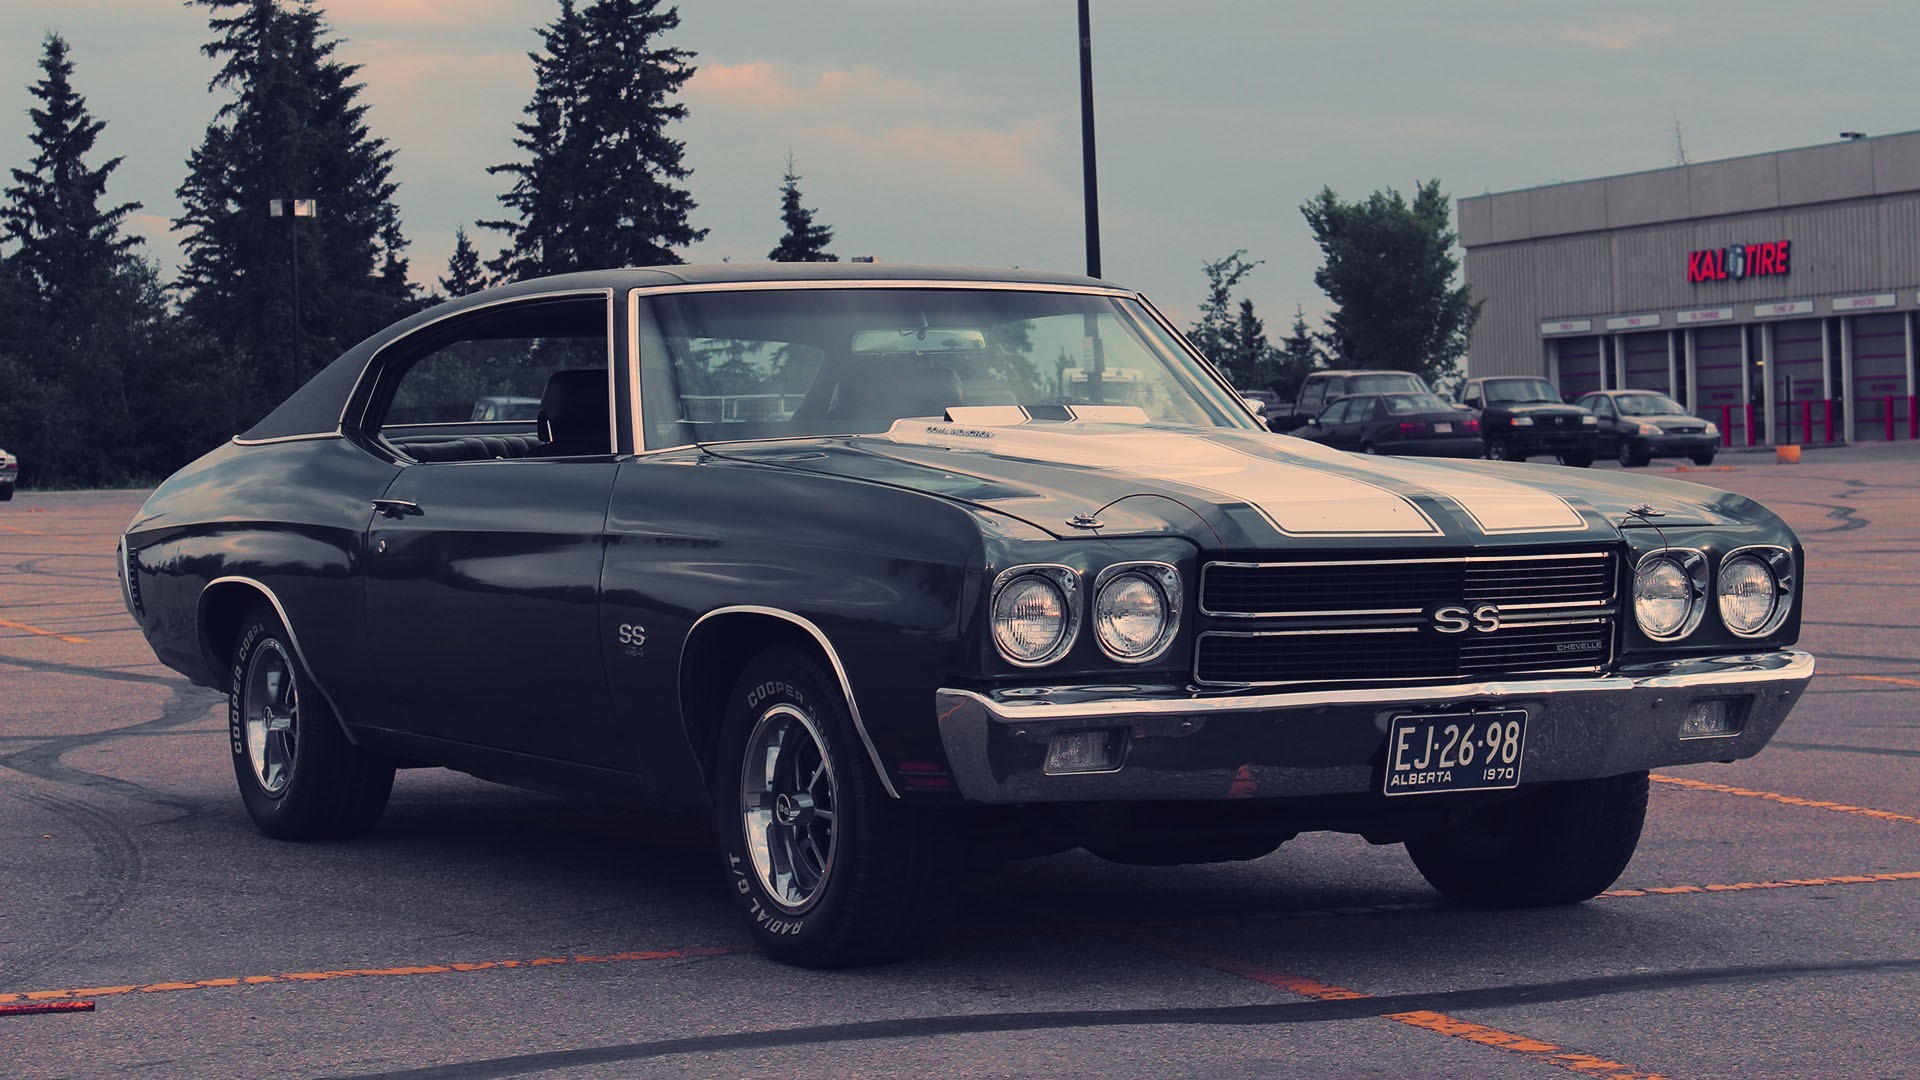 Chevelle Backgrounds